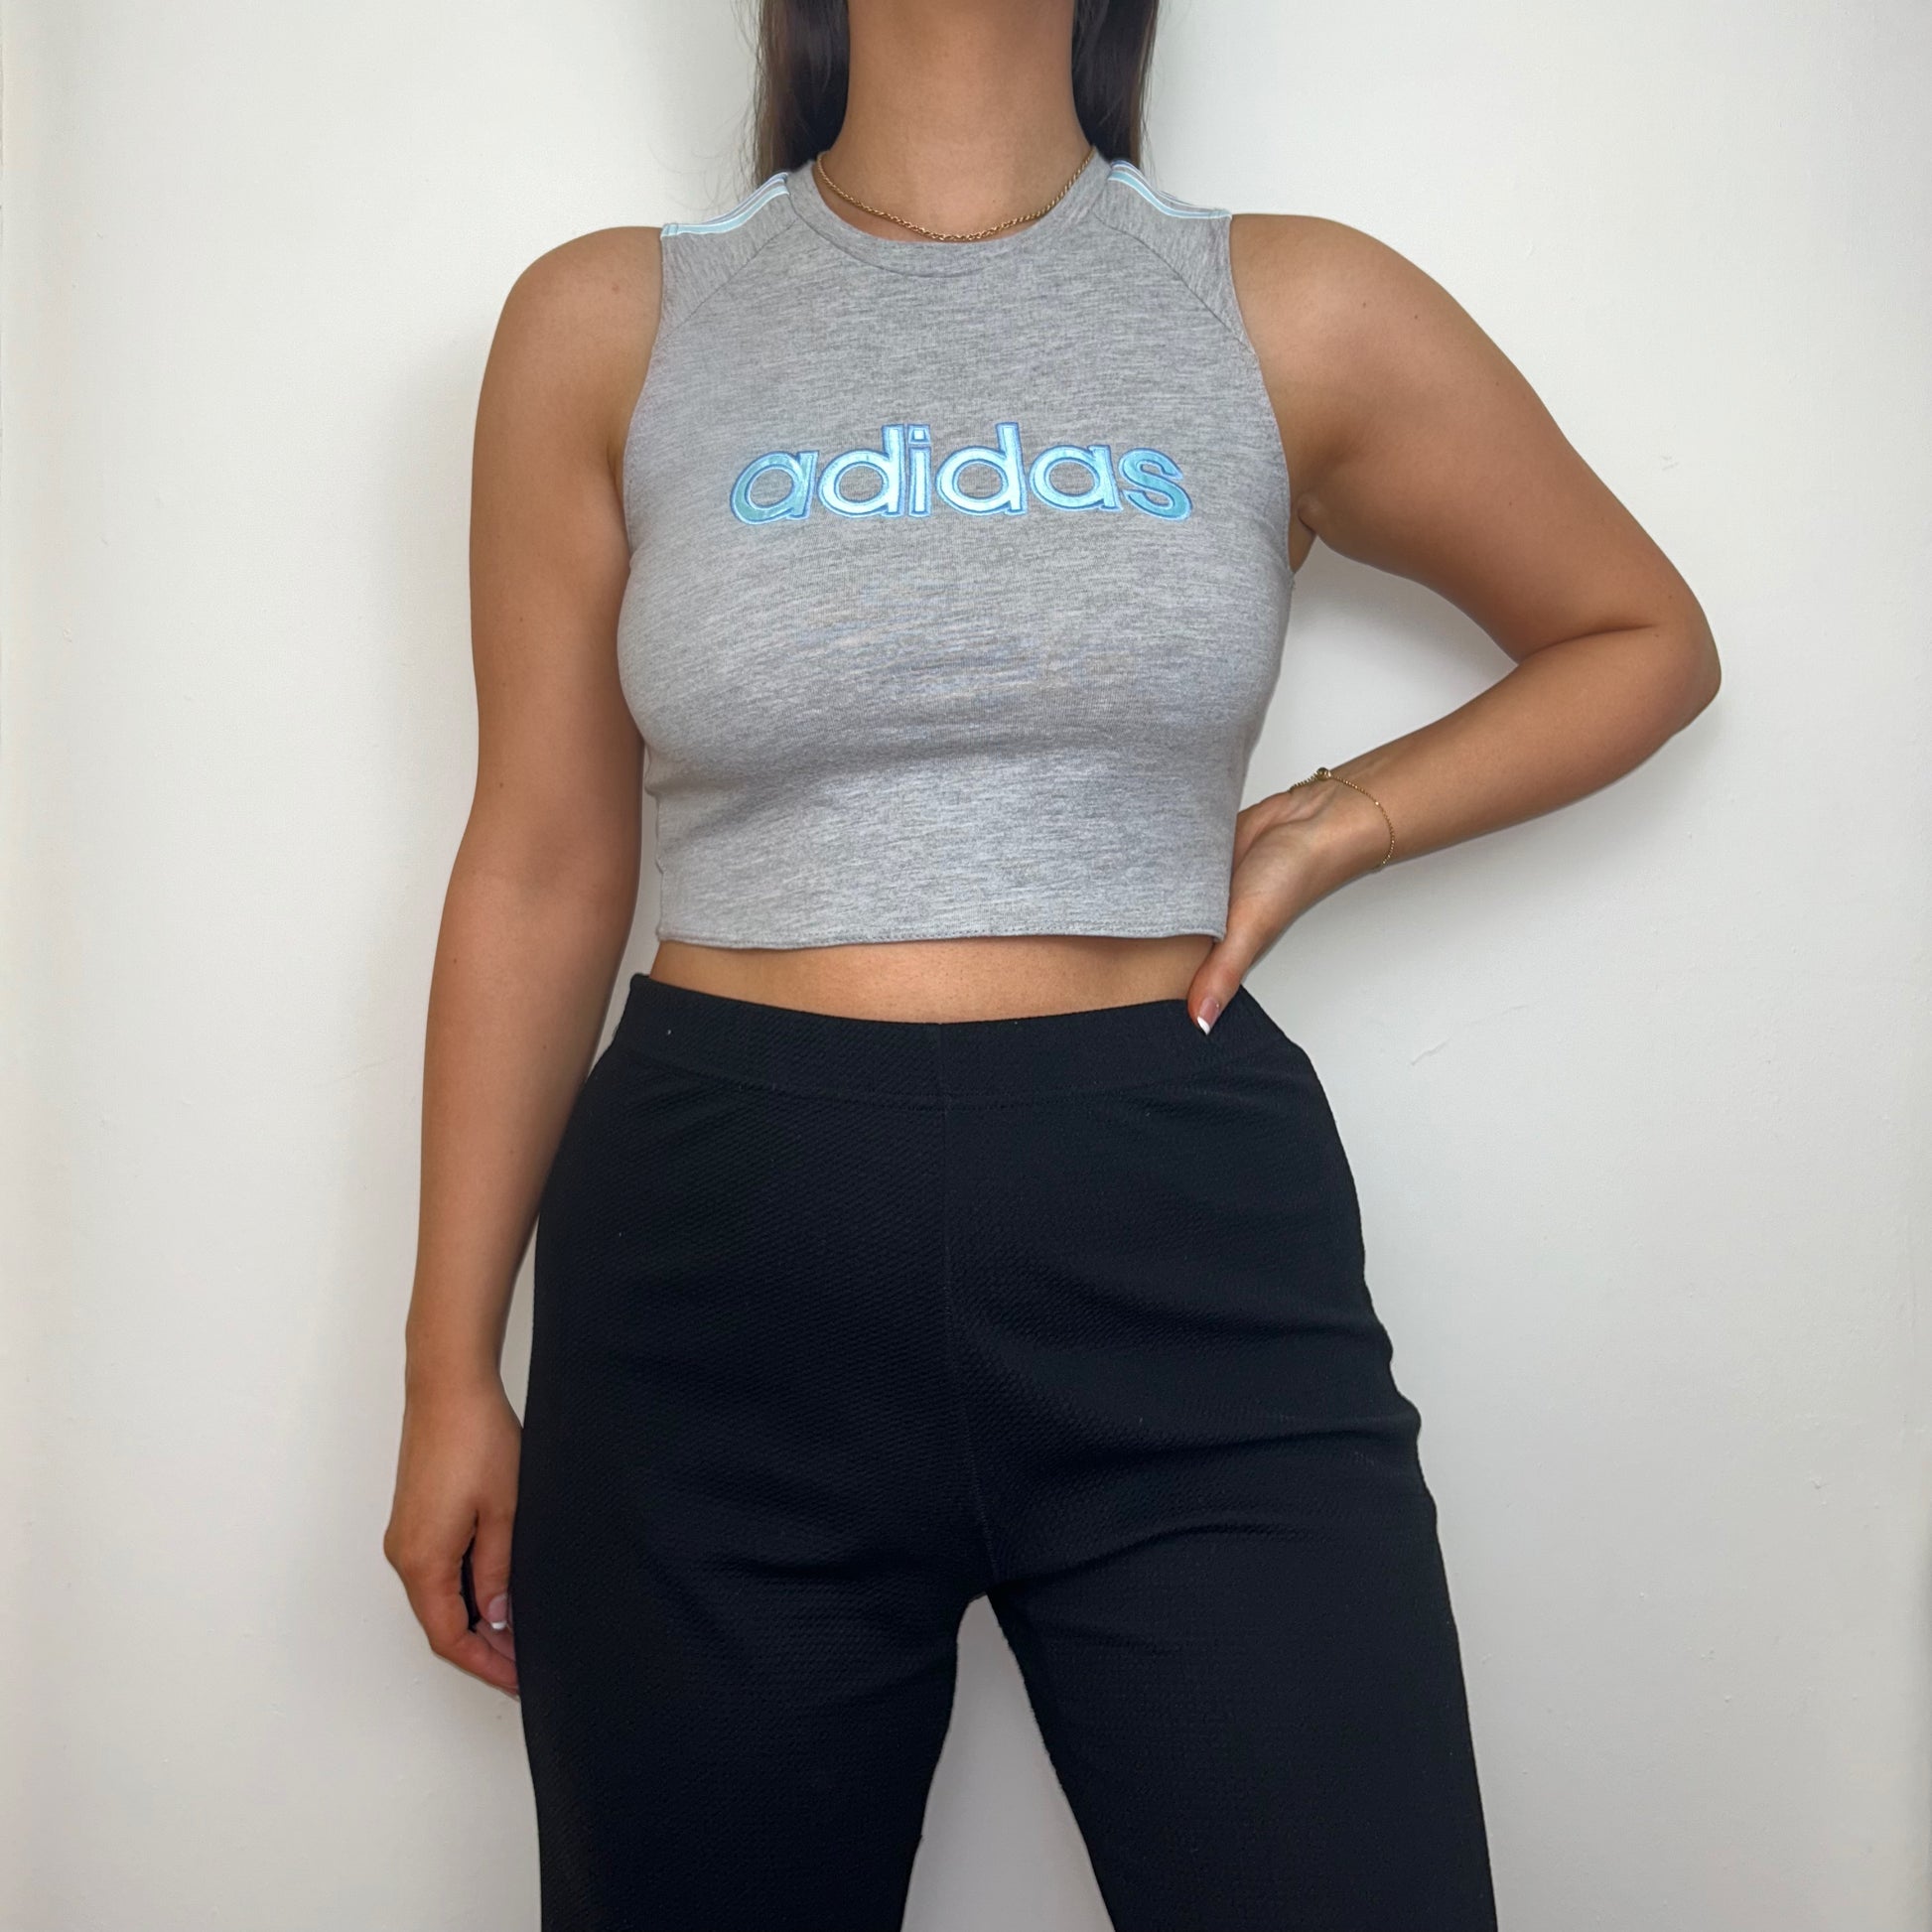 grey short sleeve crop top with light blue adidas logo shown on a model wearing black trousers